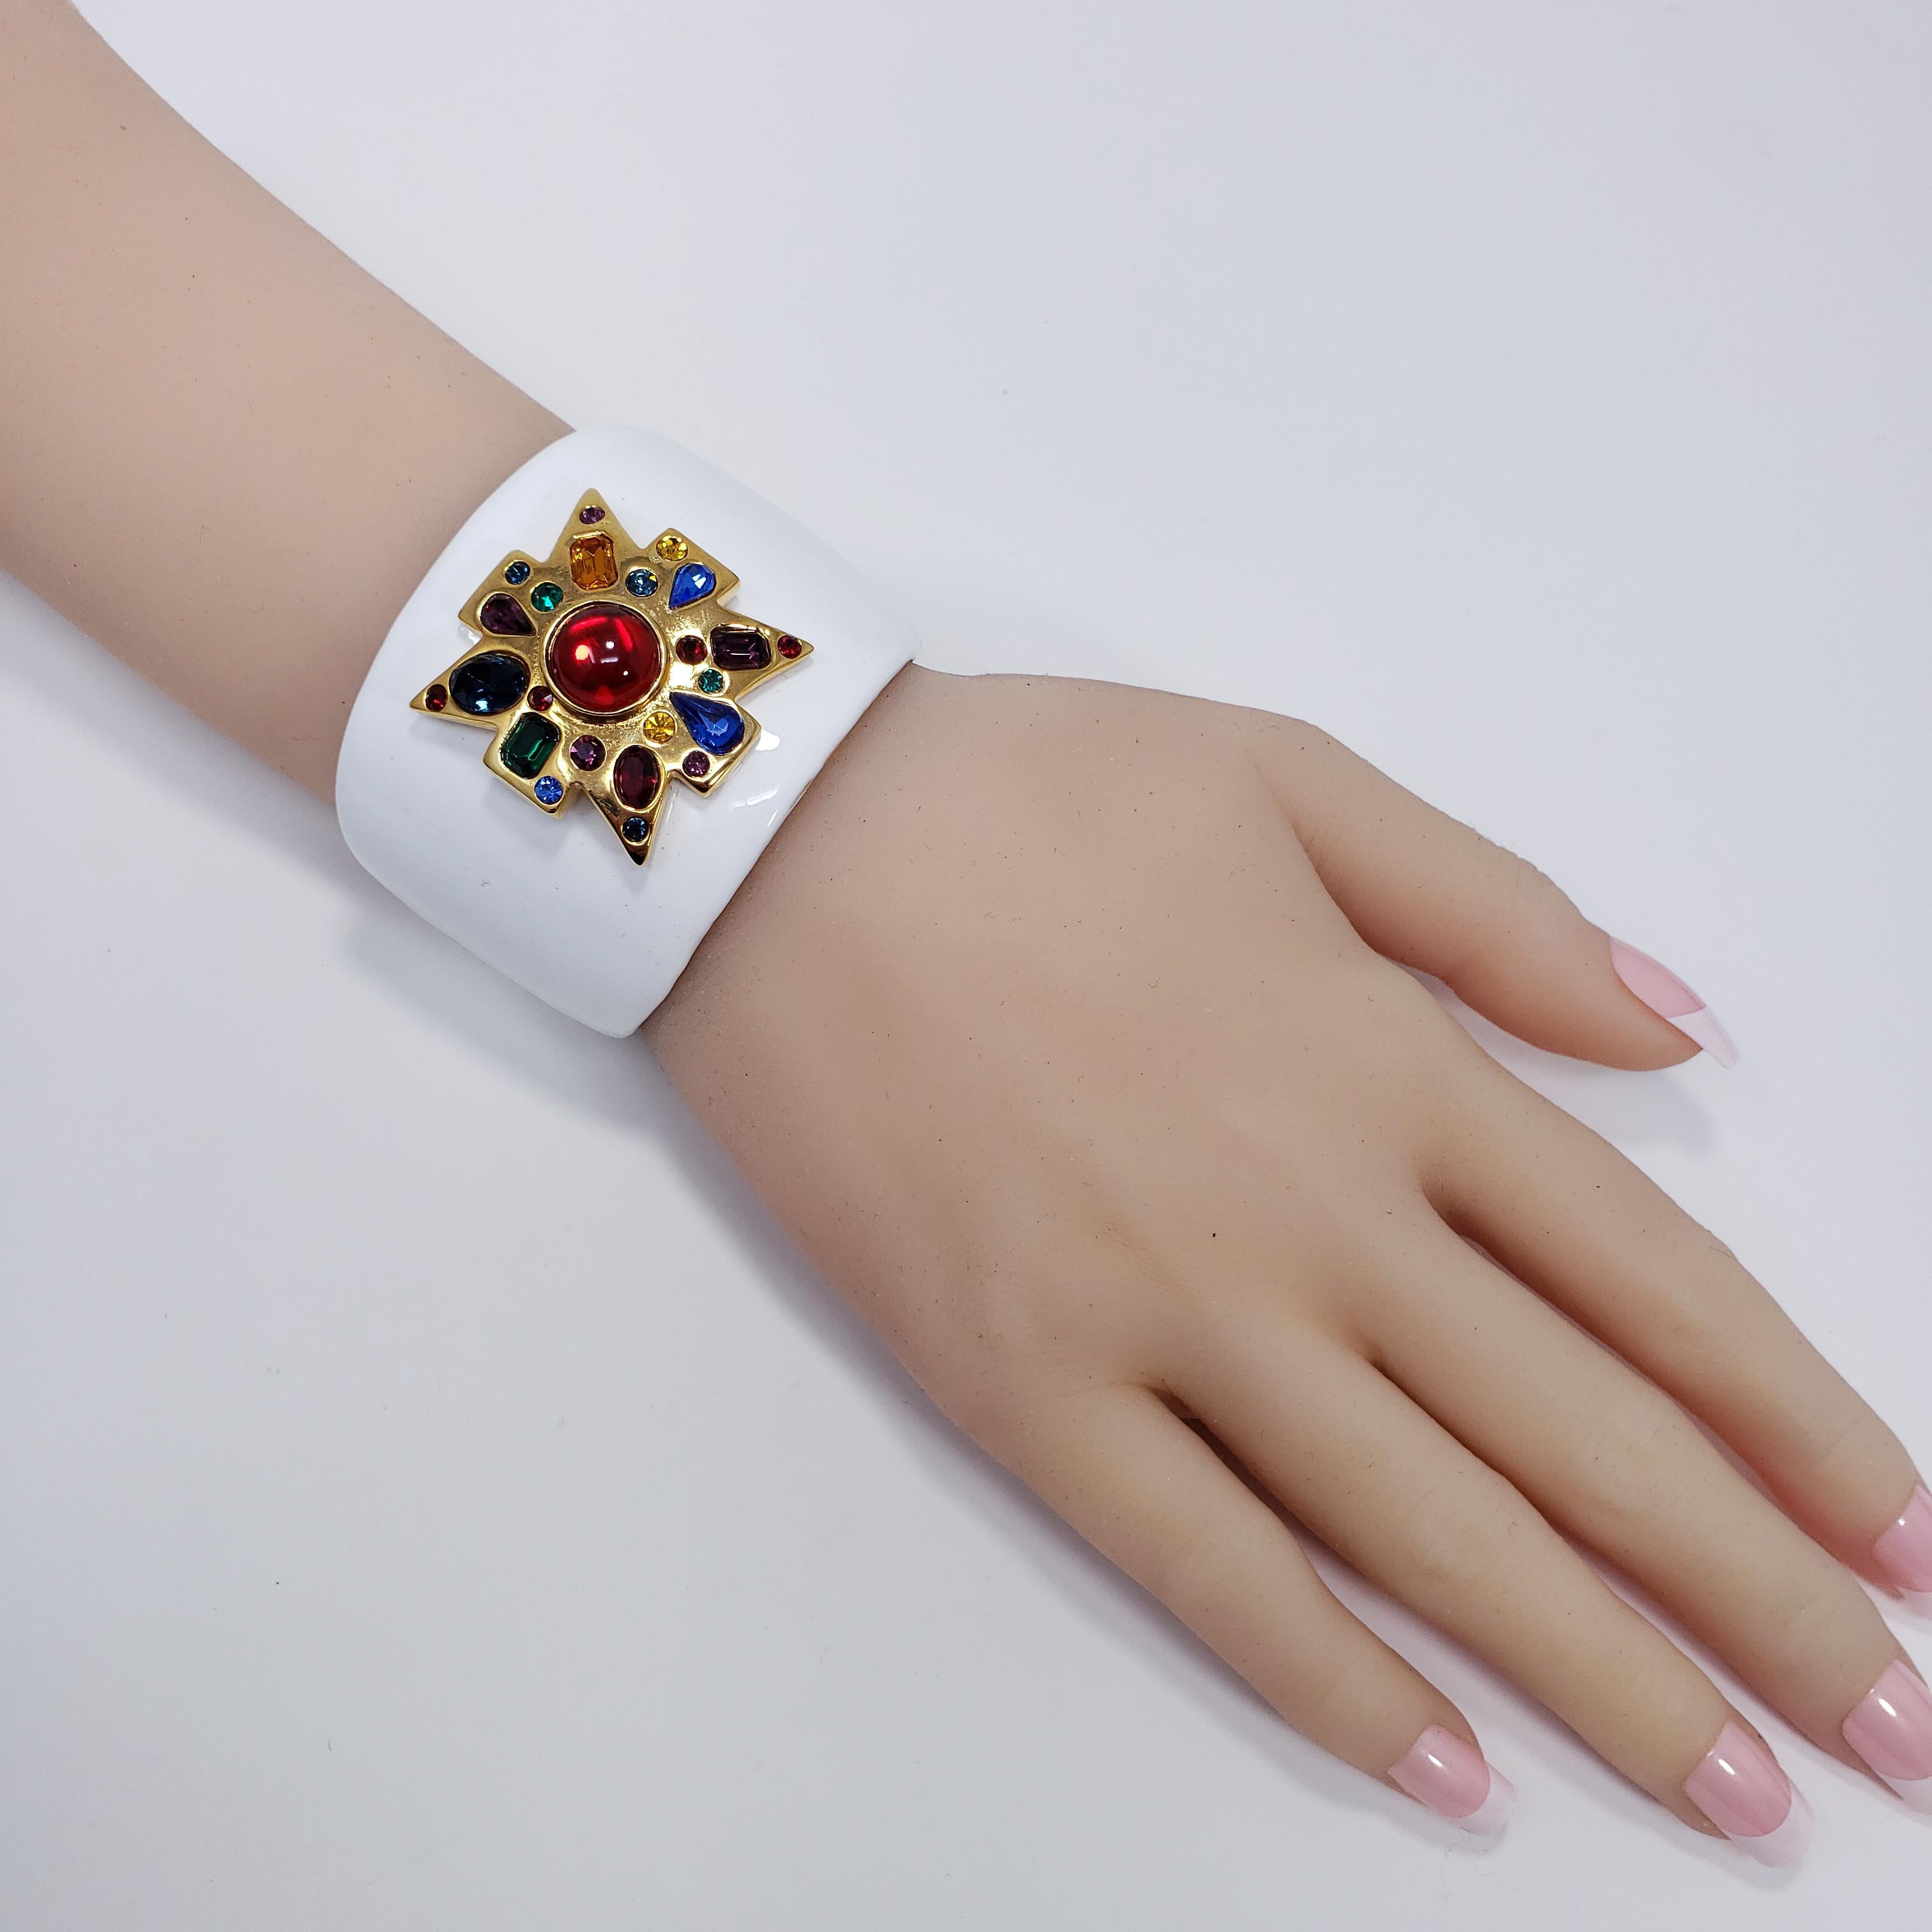 A stylish Kenneth Jay Lane cuff bracelet. Features a gold-plated tapered band painted in white enamel. A bold maltese cross motif is accented with colorful crystals and a vibrant centerpiece red cabochon.

Hallmarks: KJL
Inner circumference: 15